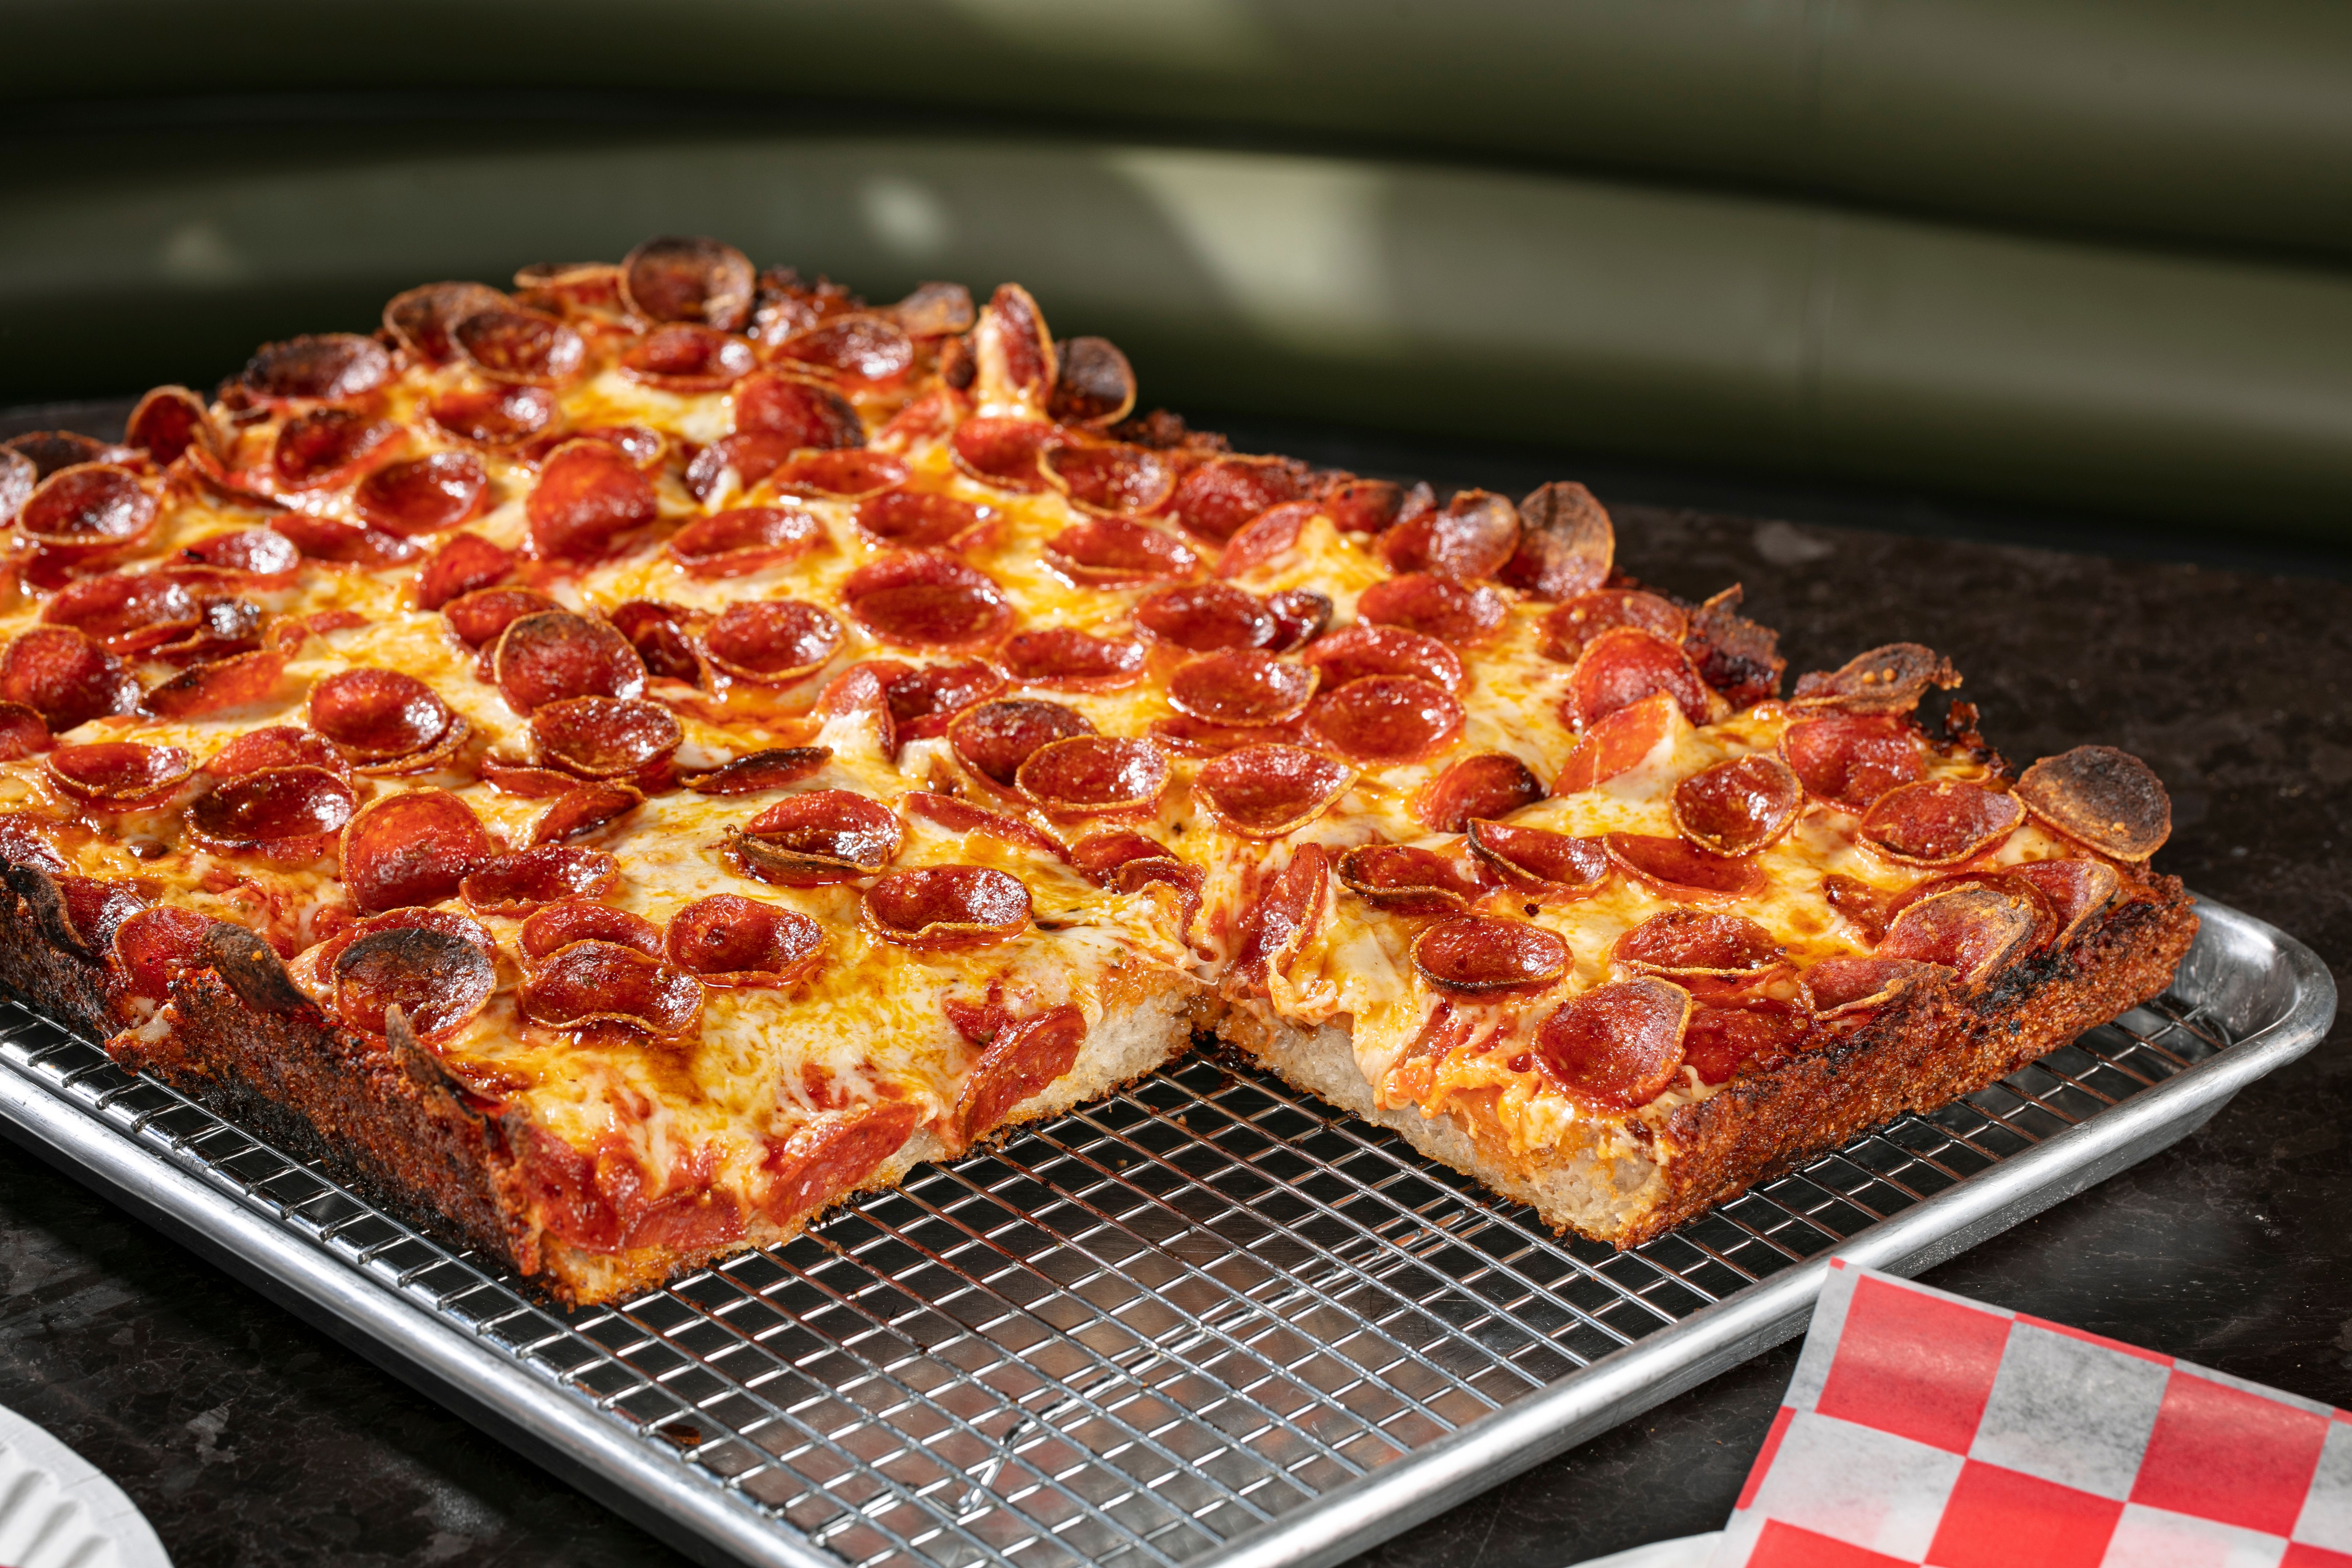 A photo of a square, thick pepperoni pie covered in cheese and roni cups cooling on a metal grate.